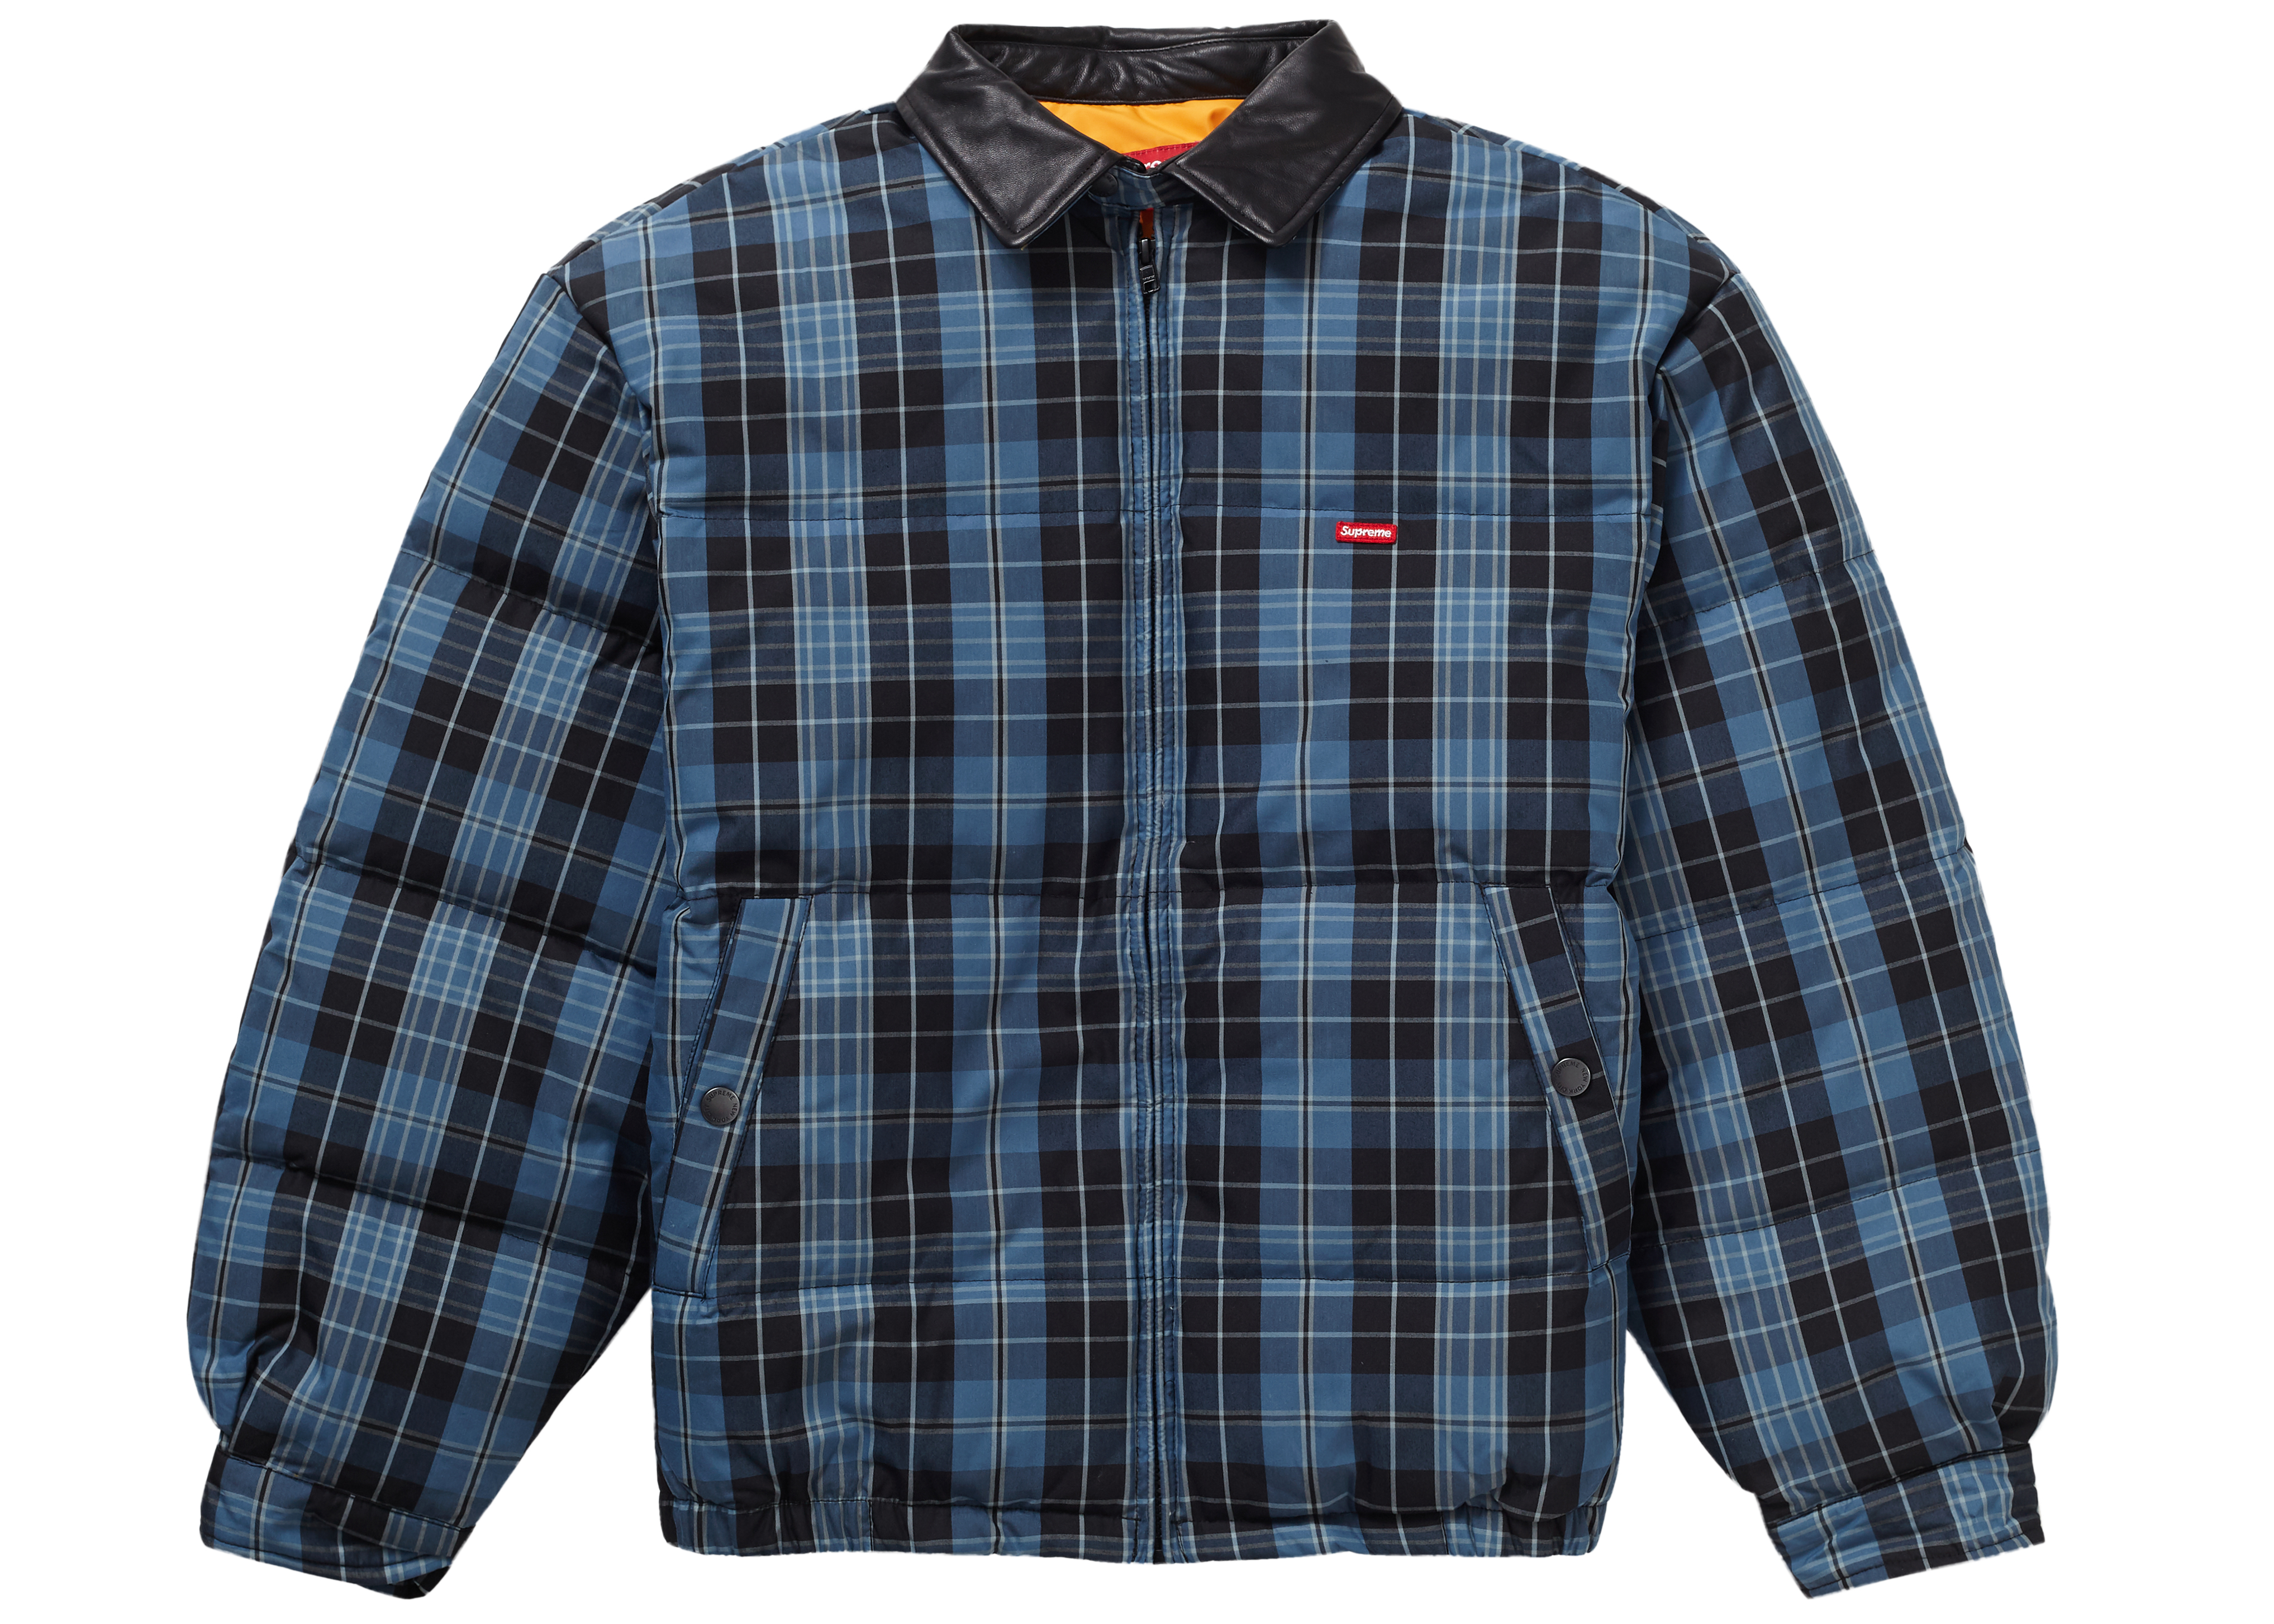 Supreme Leather Collar Puffy Jacket Blue Plaid Men's - FW19 - US